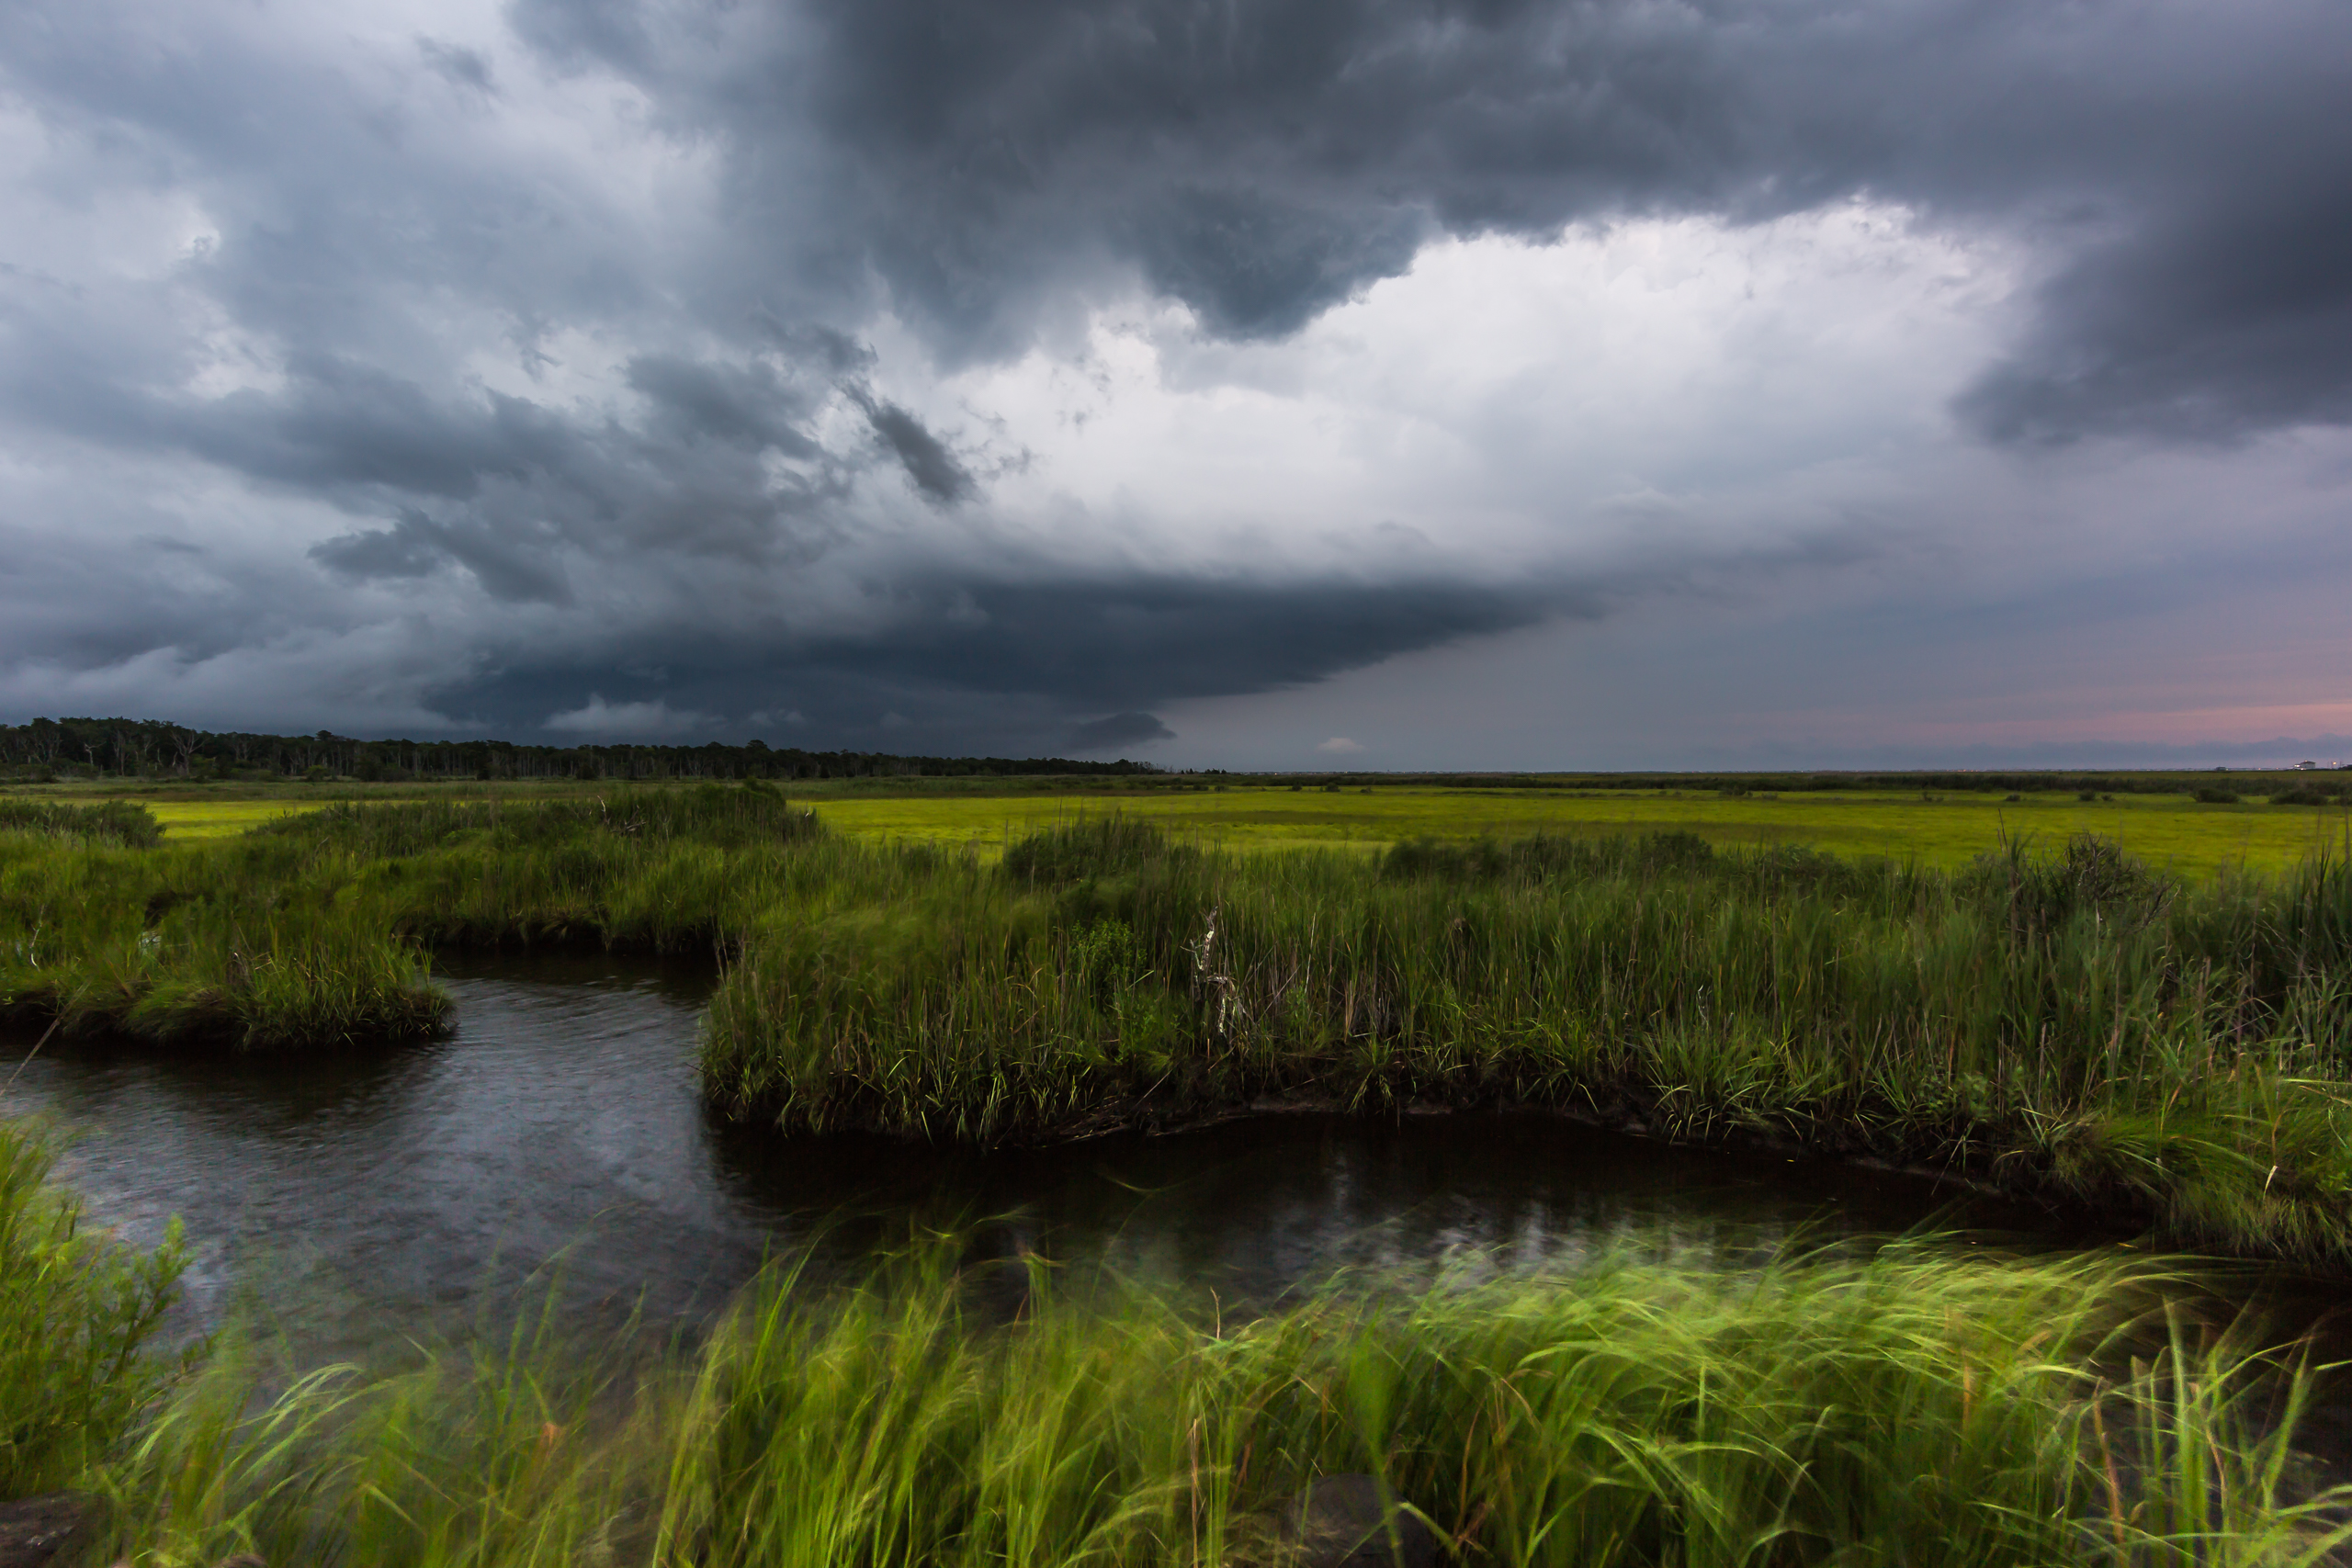 Wide angle photograph of severe weather clouds moving in over a salt marsh.